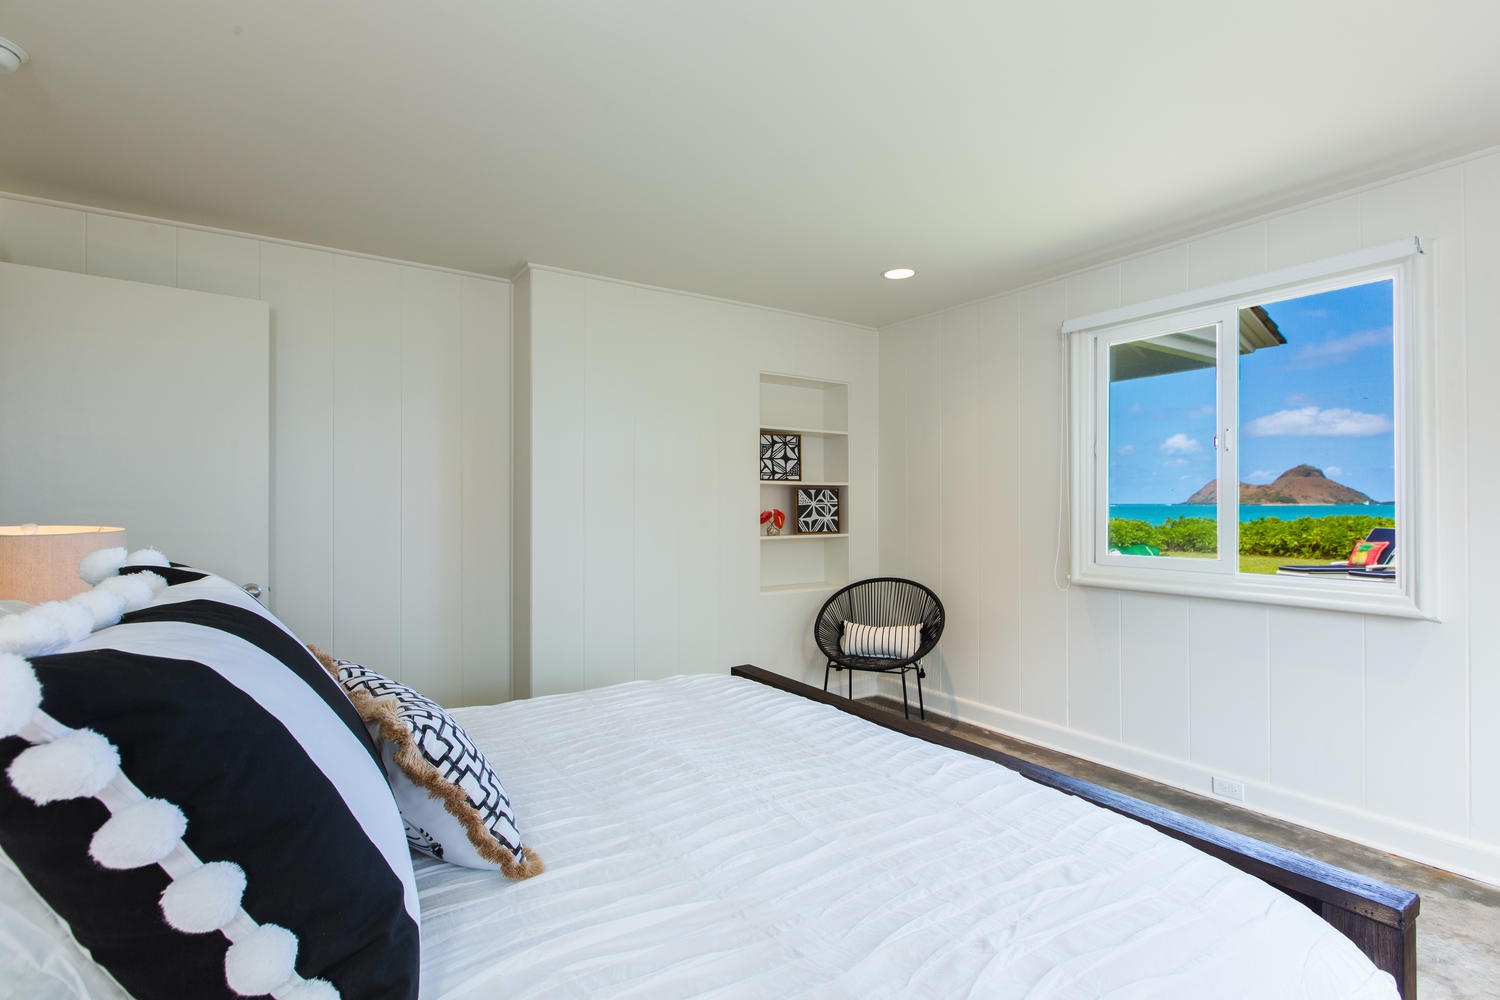 Kailua Vacation Rentals, Lanikai Oceanside 5 Bedroom - Primary bedroom with a view!